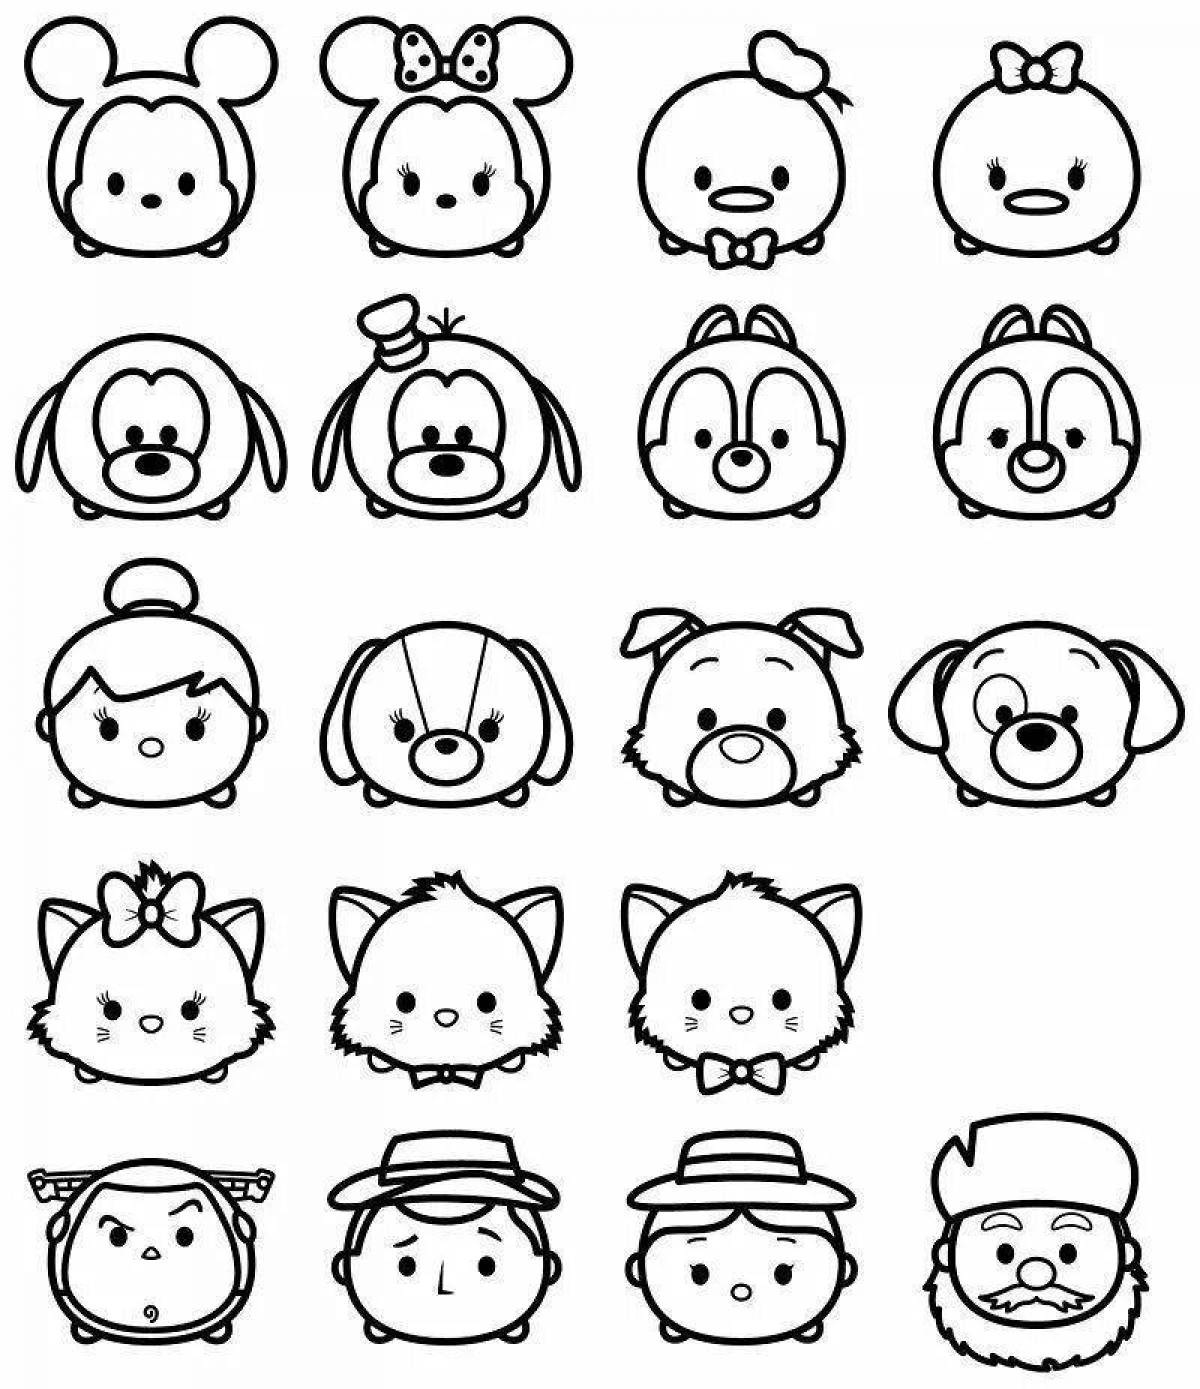 Coloring pages tasteful cute stickers